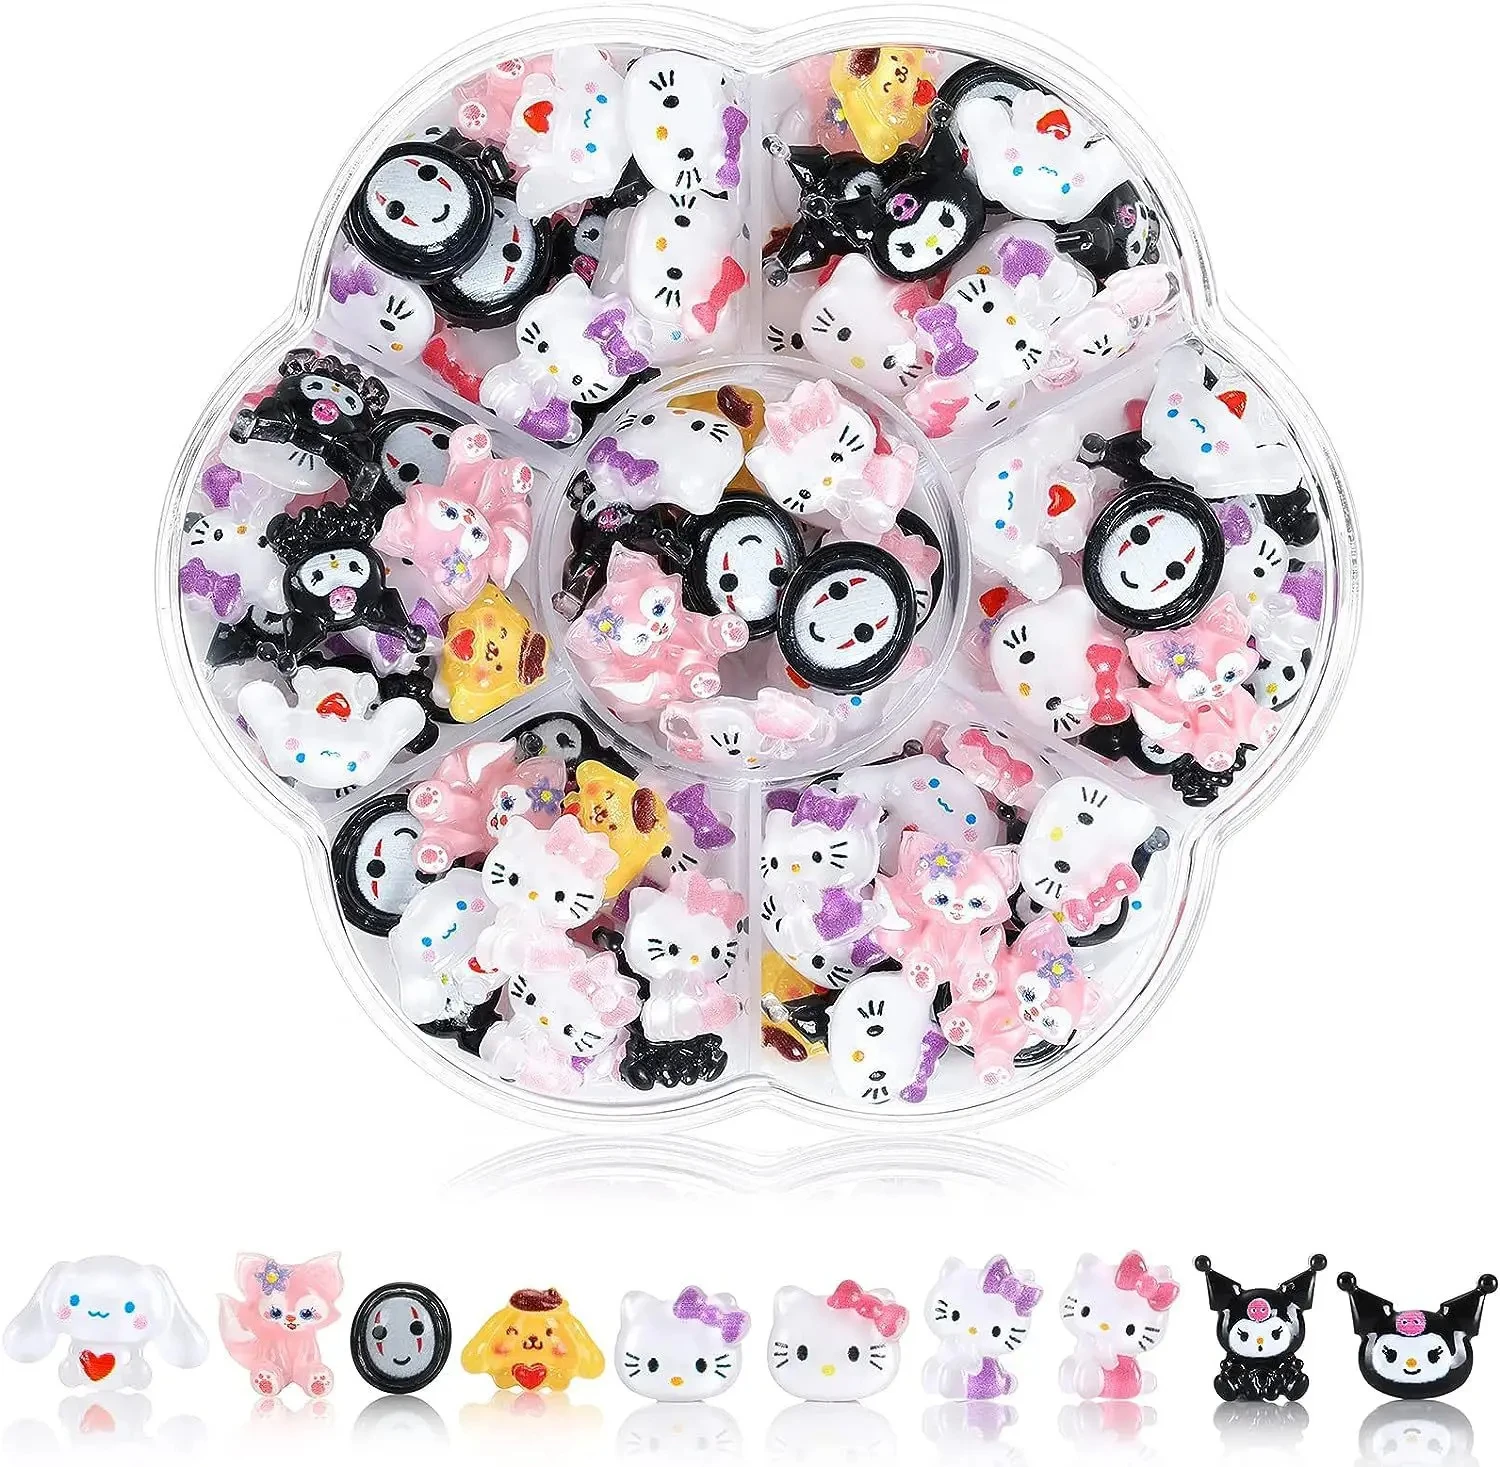 70Pcs/box Sanrio Fake Nail Jewelry Set Cartoon Hello Kitty Cinnamoroll Mymelody Diy Anime Accessories Charms Gems Kit Diy Crafts 10pcs lot transparent plastic box for fake nails false nailsart stud earring jewelry storage display collestion holder whosale